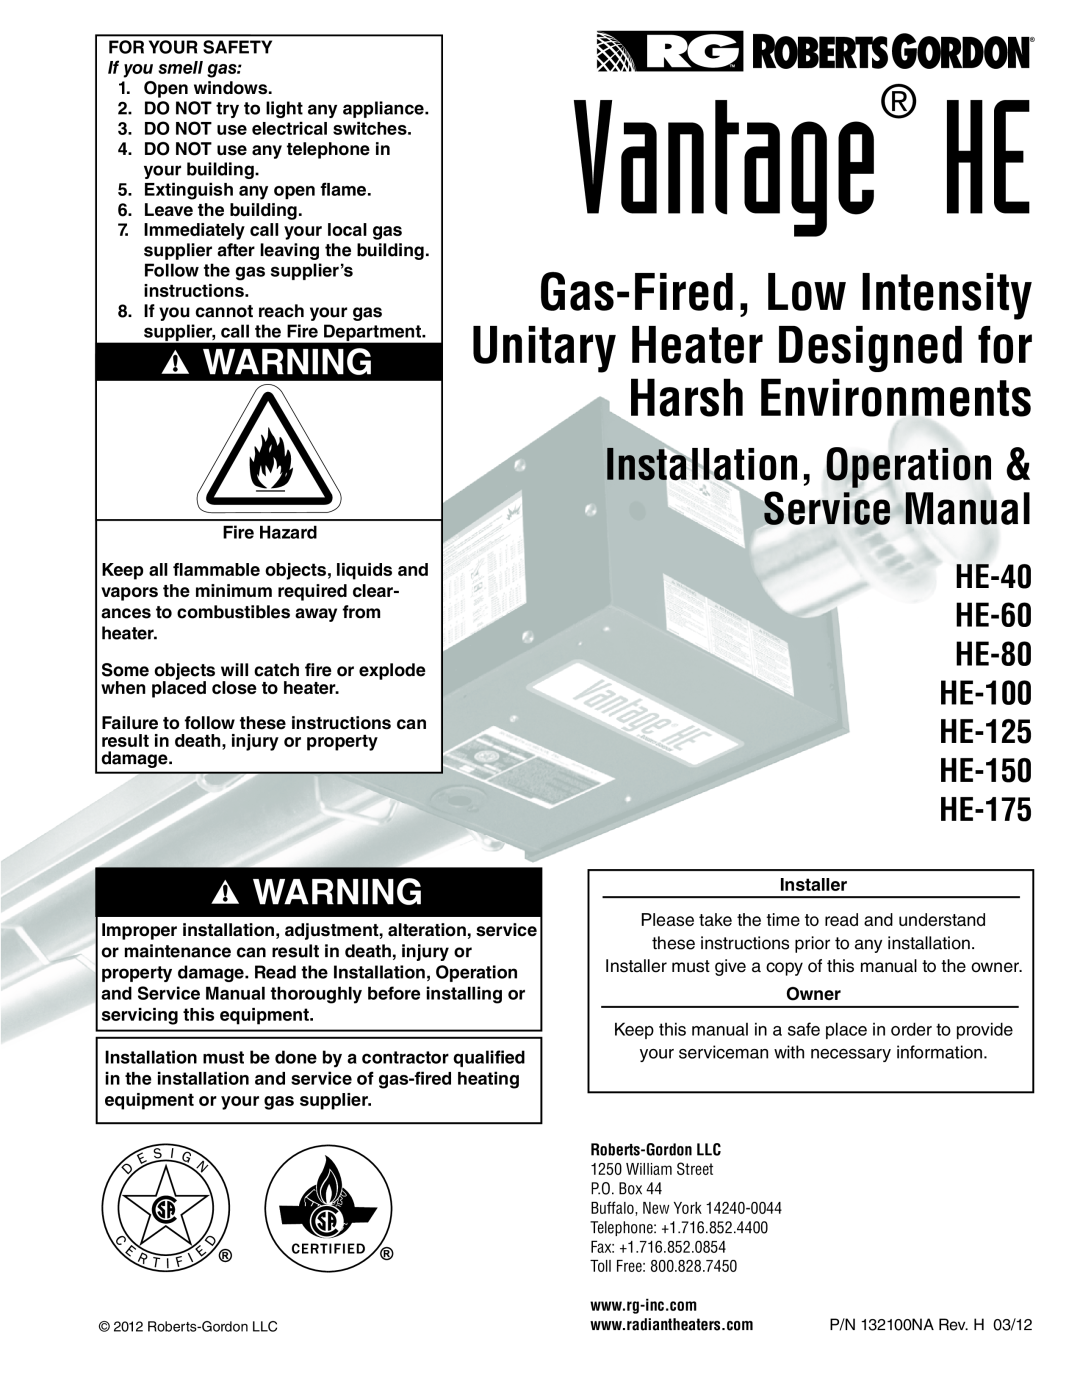 Roberts Gorden HE-80 service manual Vantage, Unitary Heater Designed for, Service Manual, Gas-Fired, Low Intensity, HE-40 